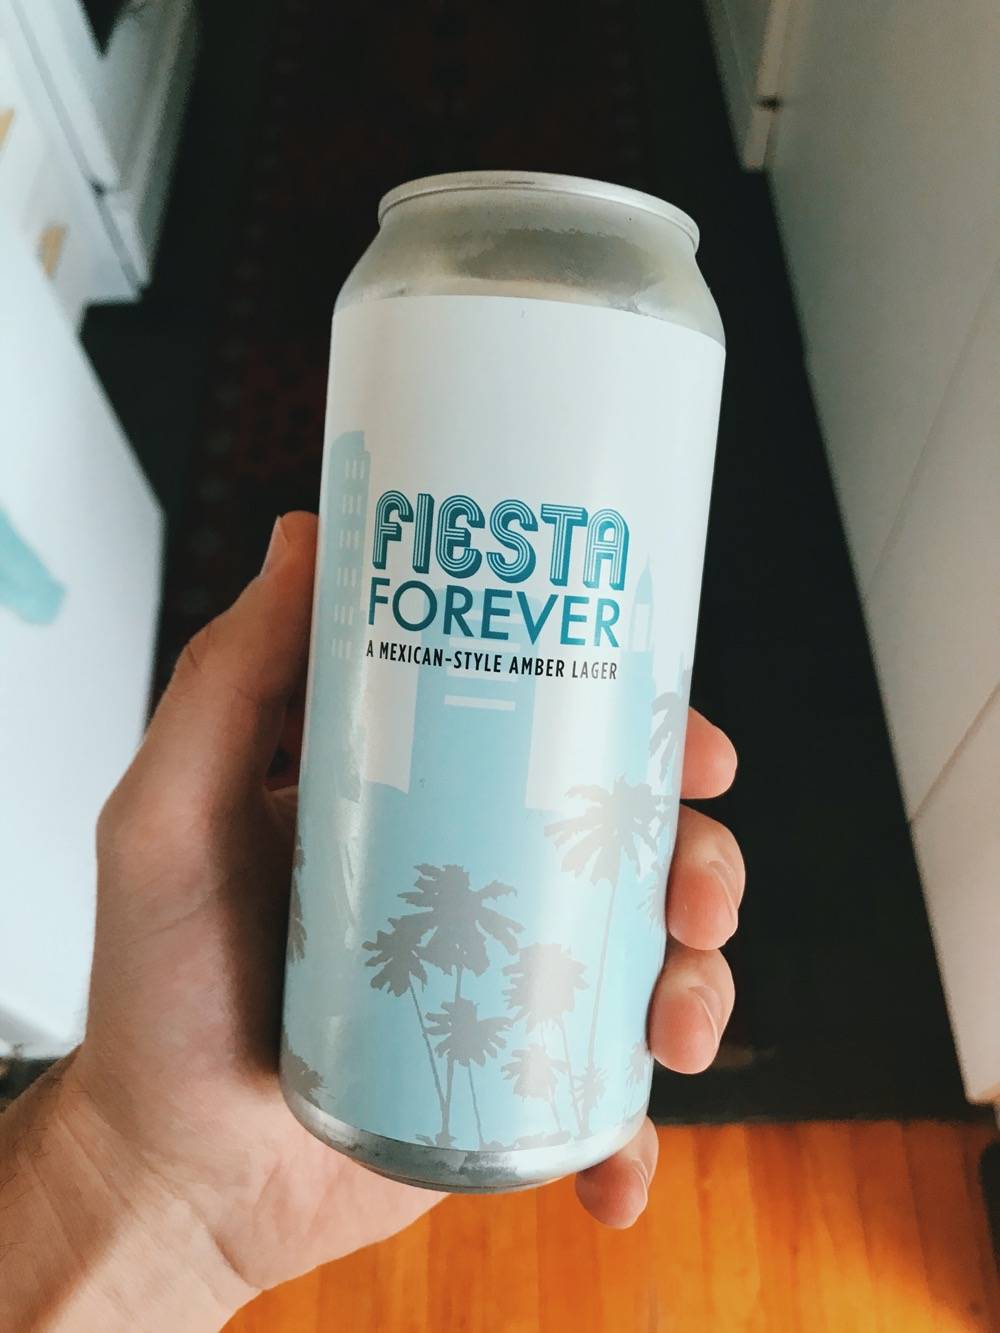 IMAGE: A can of beer being held in a hand. Label says FIESTA FOREVER: A Mexican Style Amber Lager. Photo by Patrick Singer.